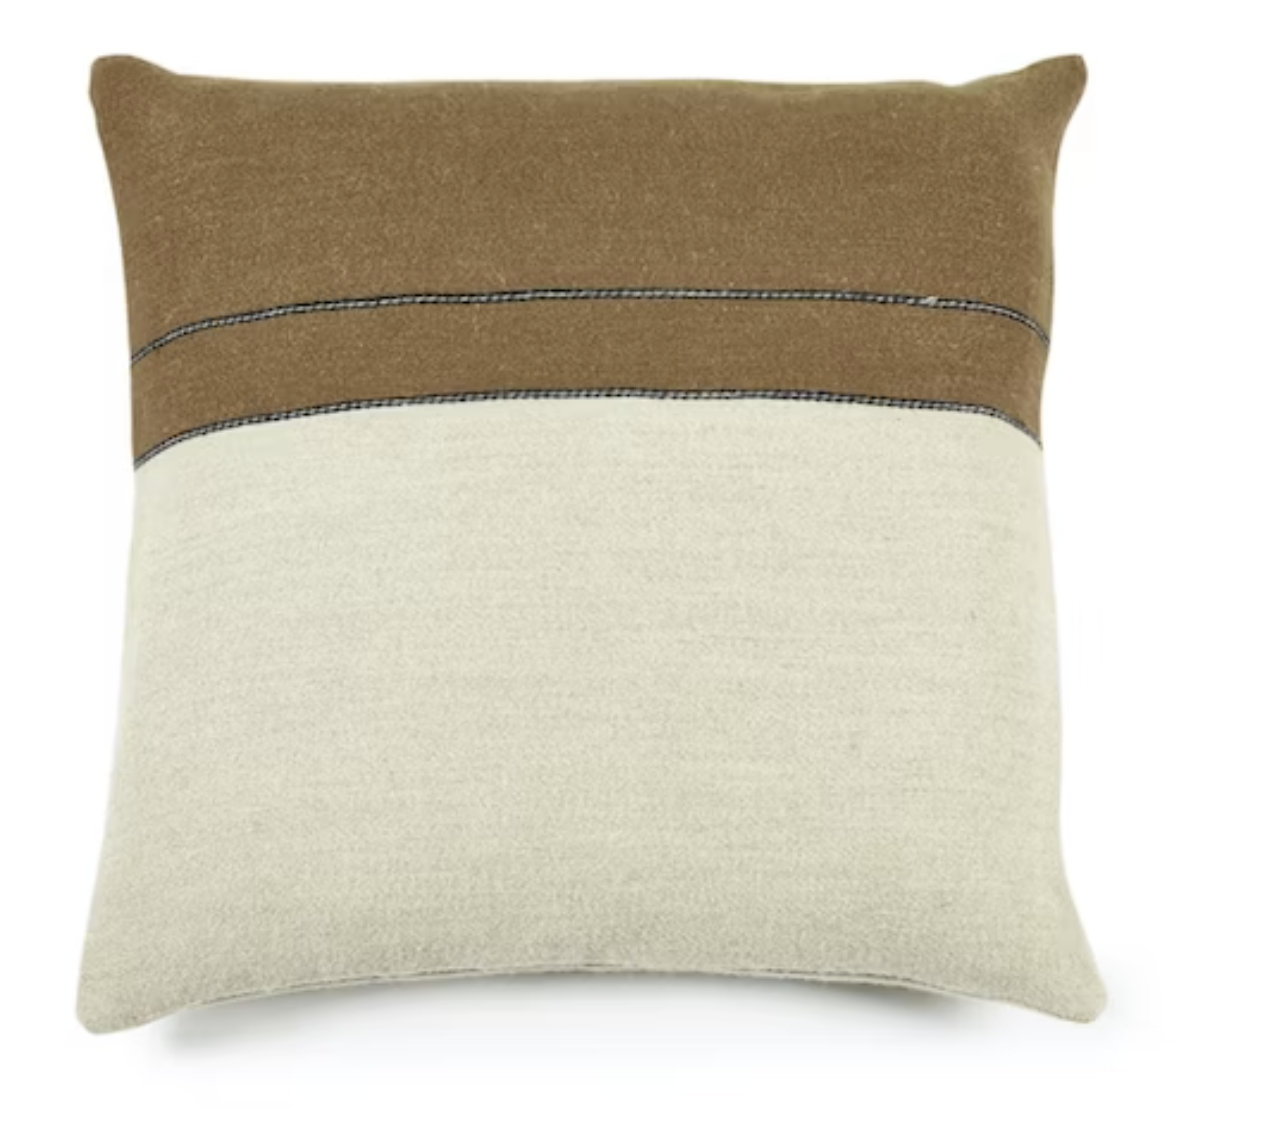 GUS PILLOW COVER - $220.00